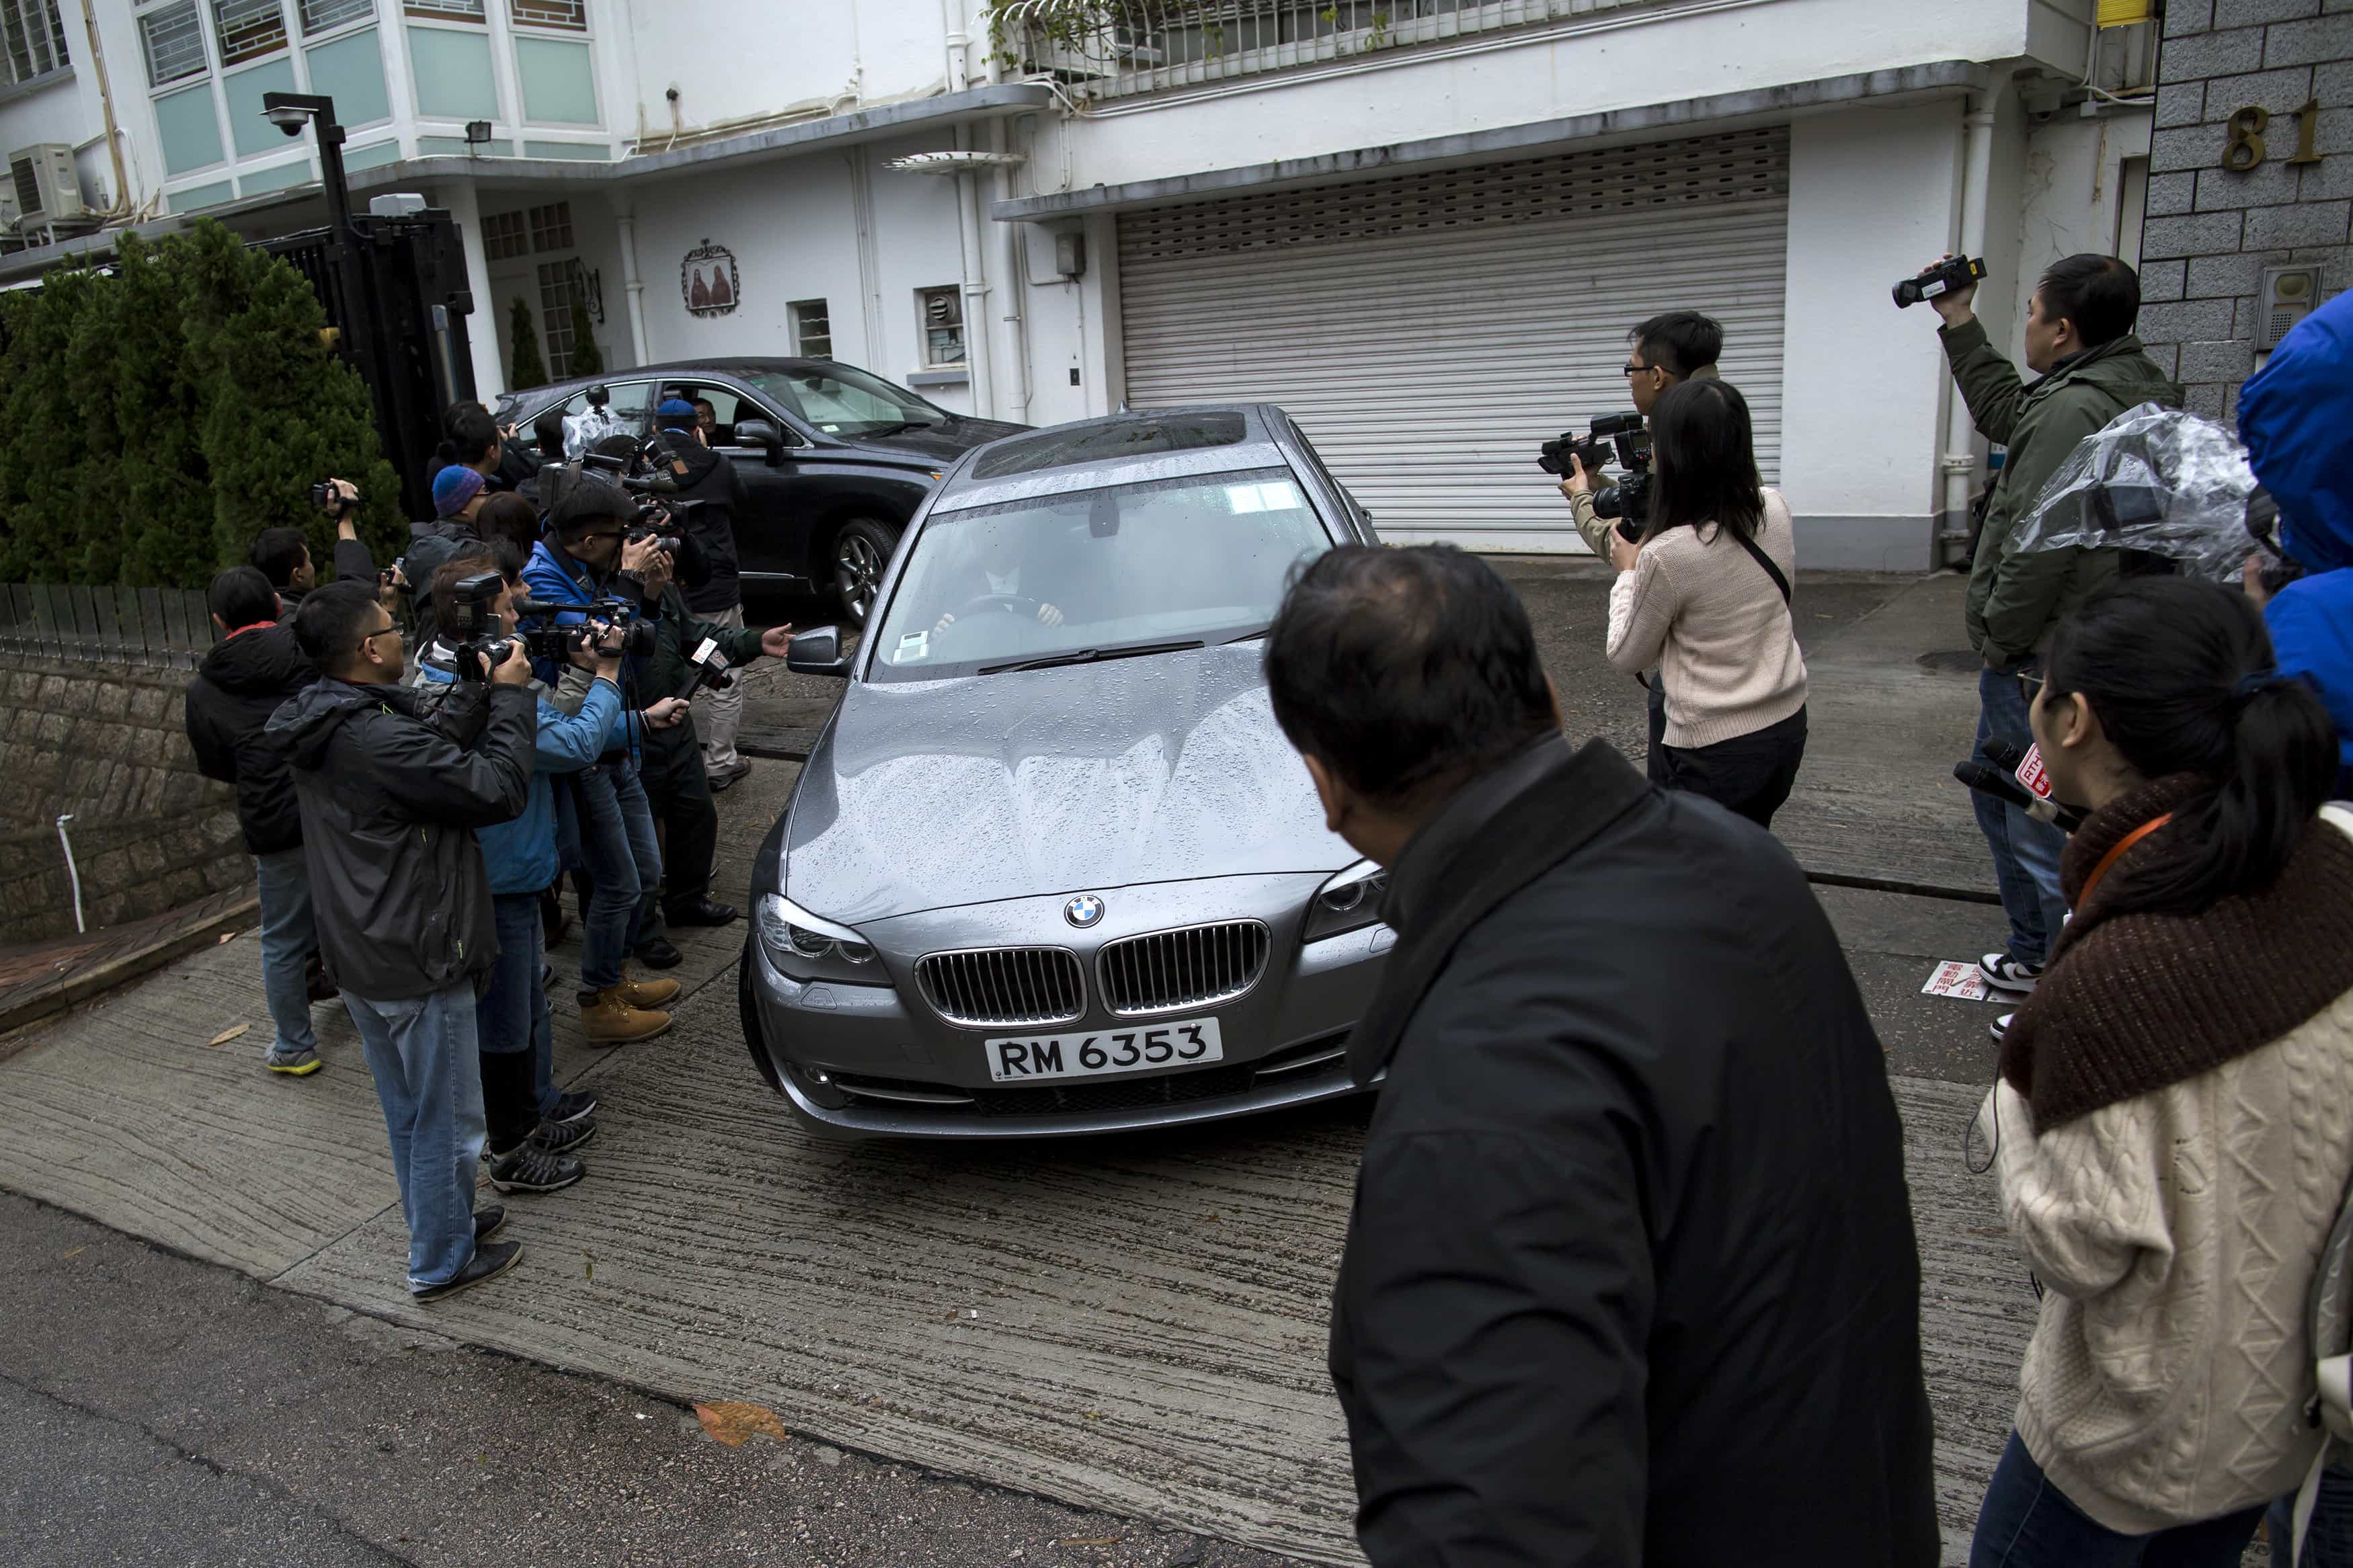 Journalists surround a car outside the house of of Hong Kong media tycoon Jimmy Lai in Hong Kong, 12 January 2015, REUTERS/Tyrone Siu